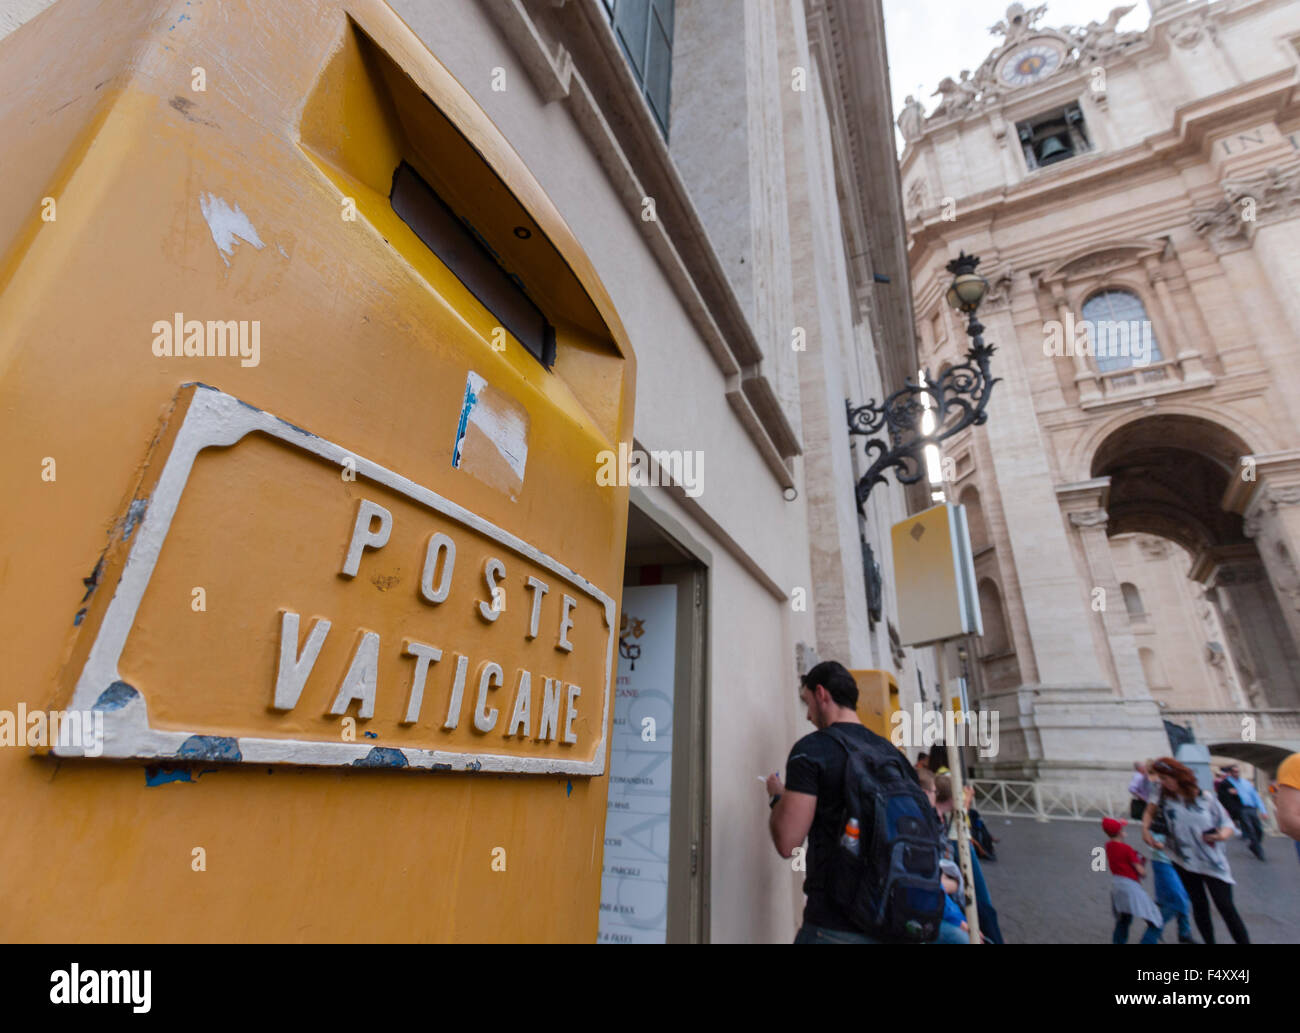 Mailbox of Poste Vaticane, the postal service of sovereign Vatican City, in front of the St Peter's Basilica at Vatican, Rome. Stock Photo